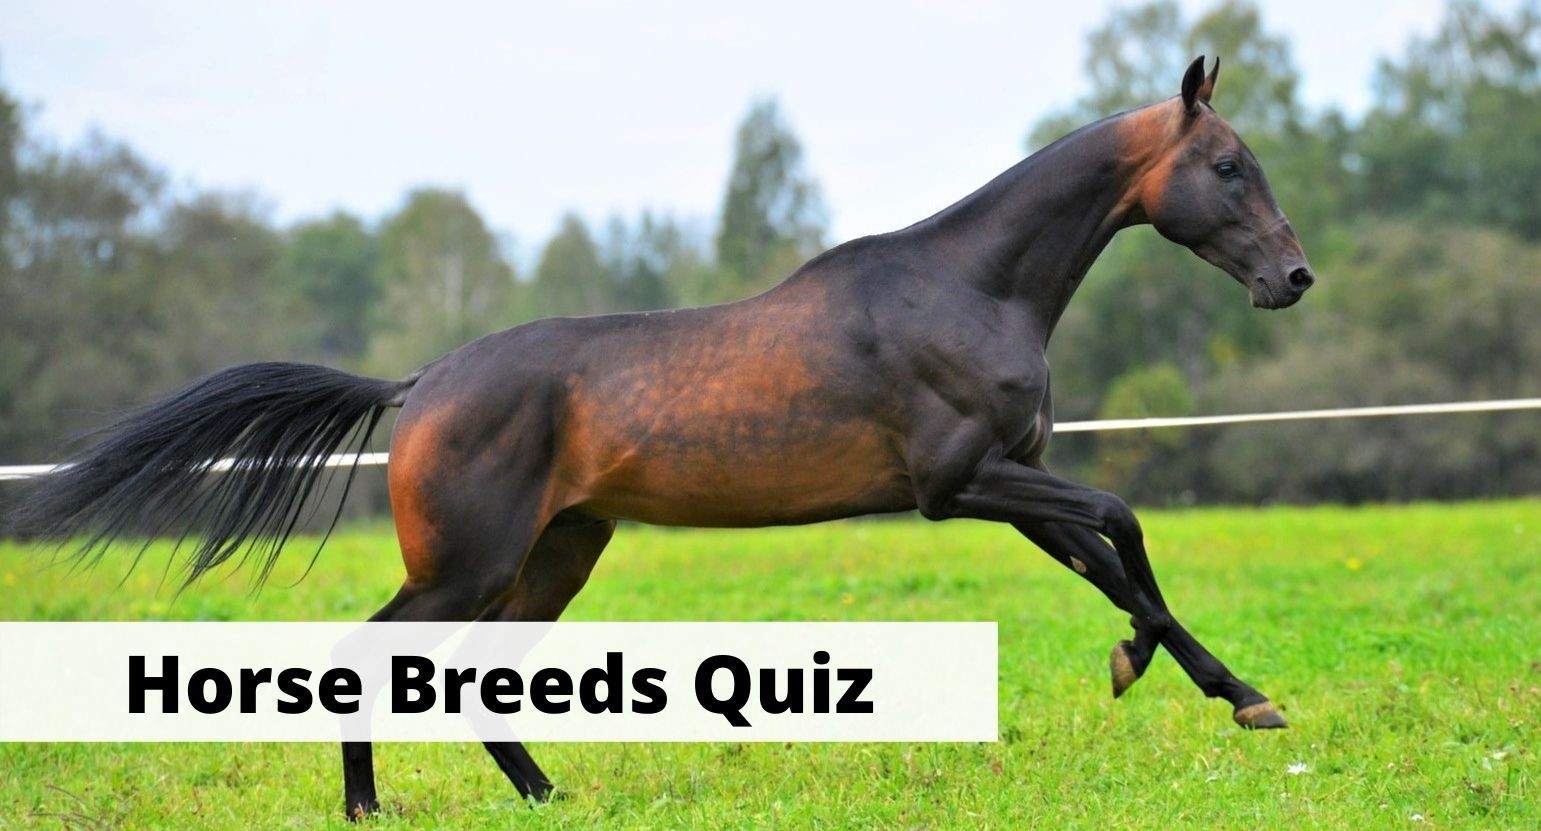 Horse Breeds Quiz: Test How Much You Know About Horse Breeds!